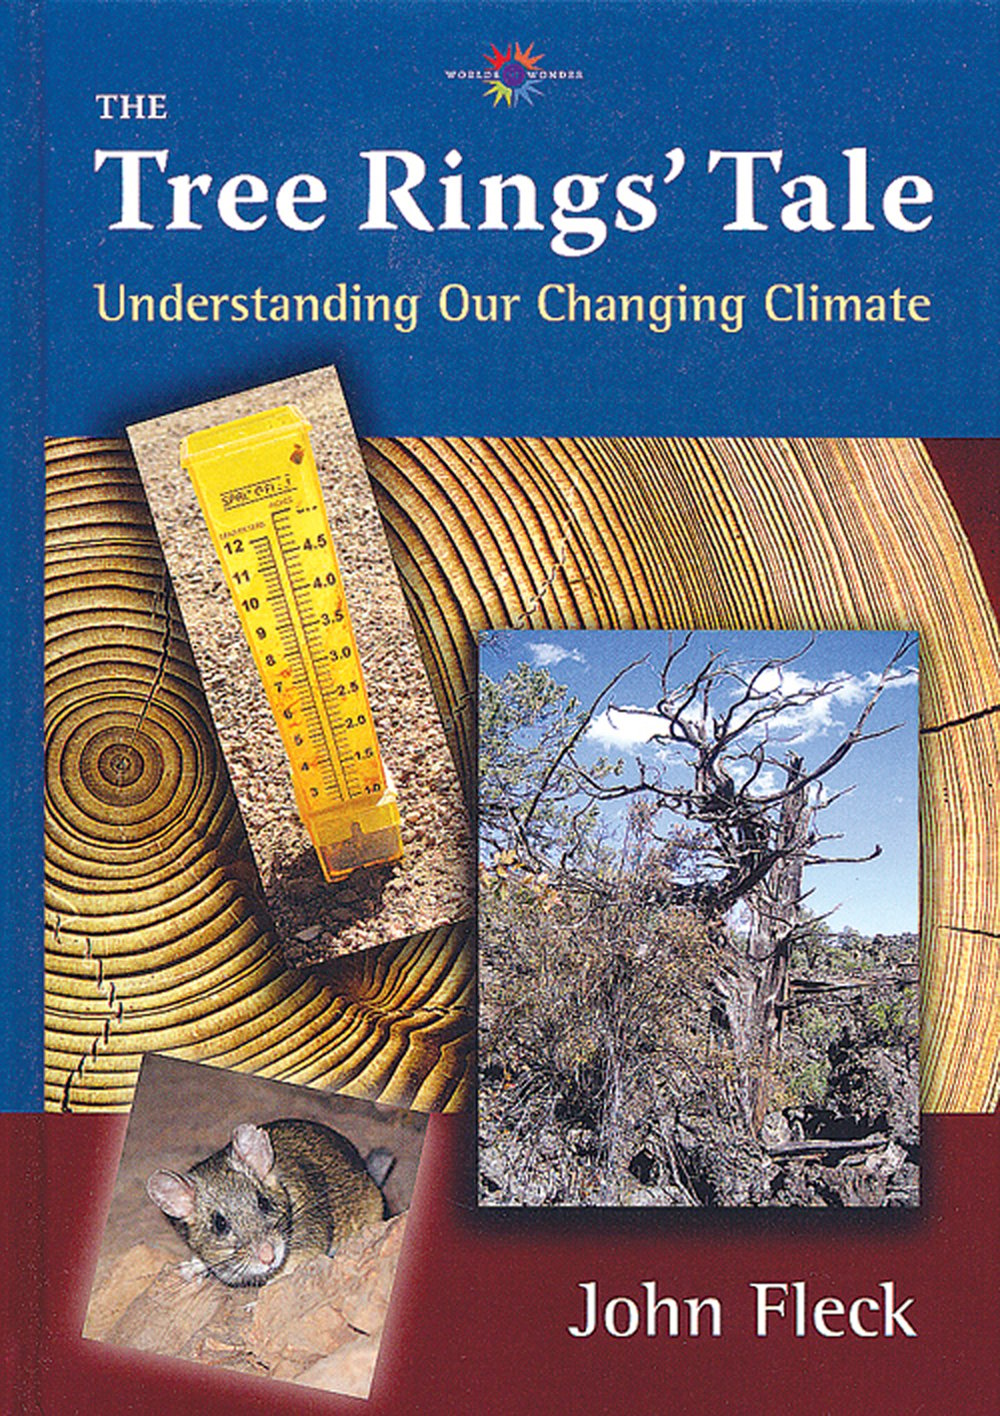 Tree Rings' Tale (The): Understanding Our Changing Climate